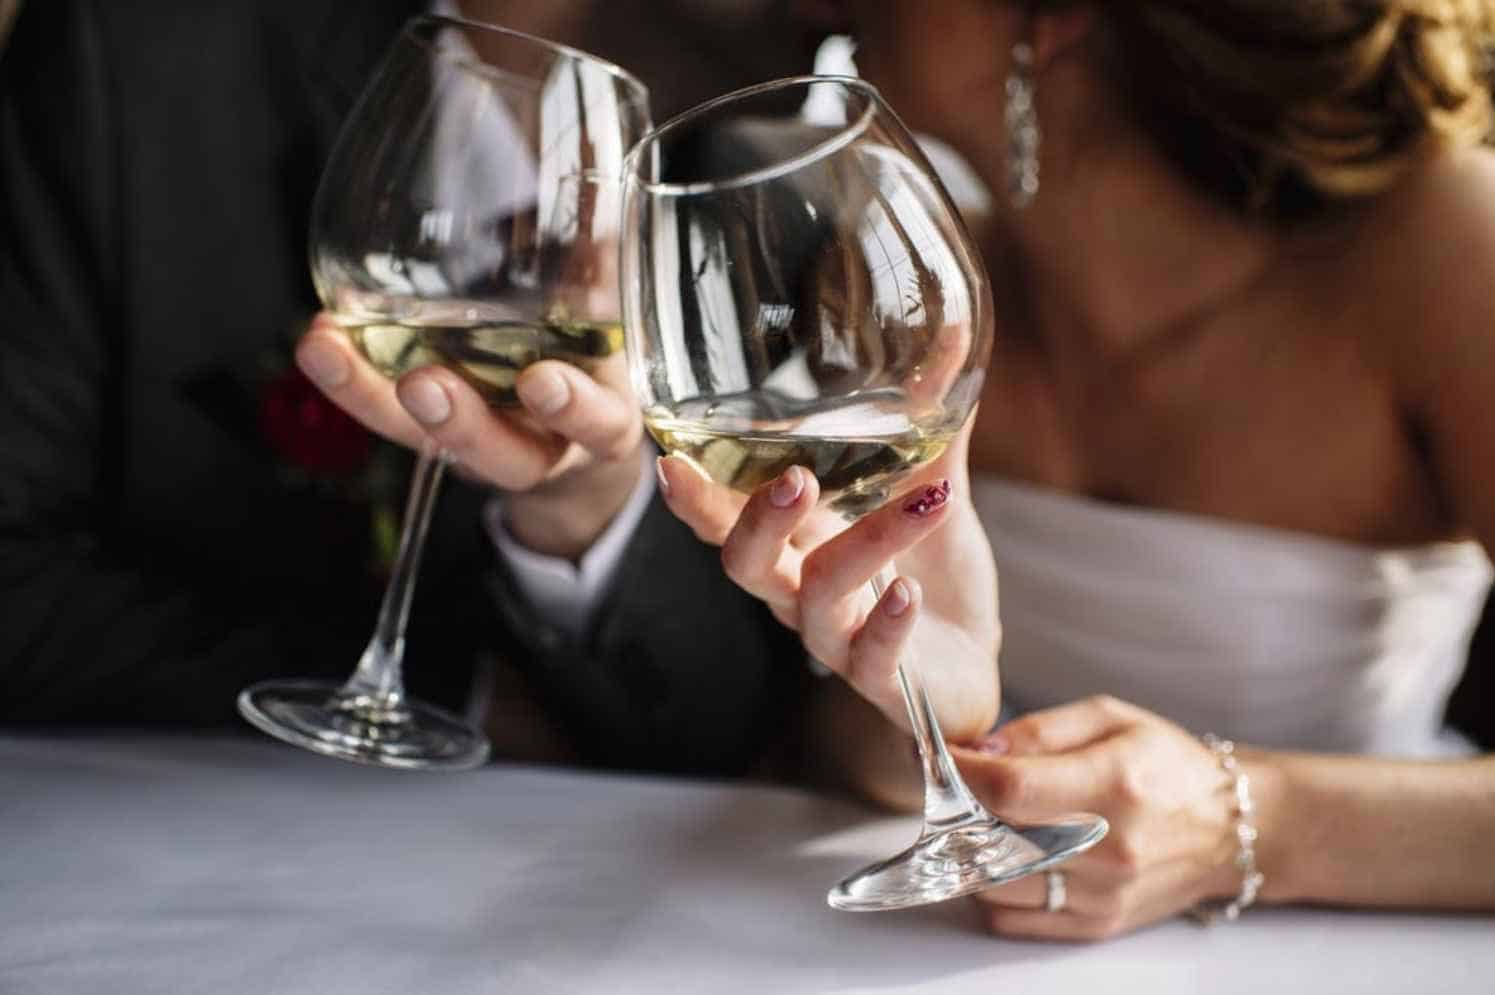 What are the Tips to Buy the Right Amount of Wedding Wine